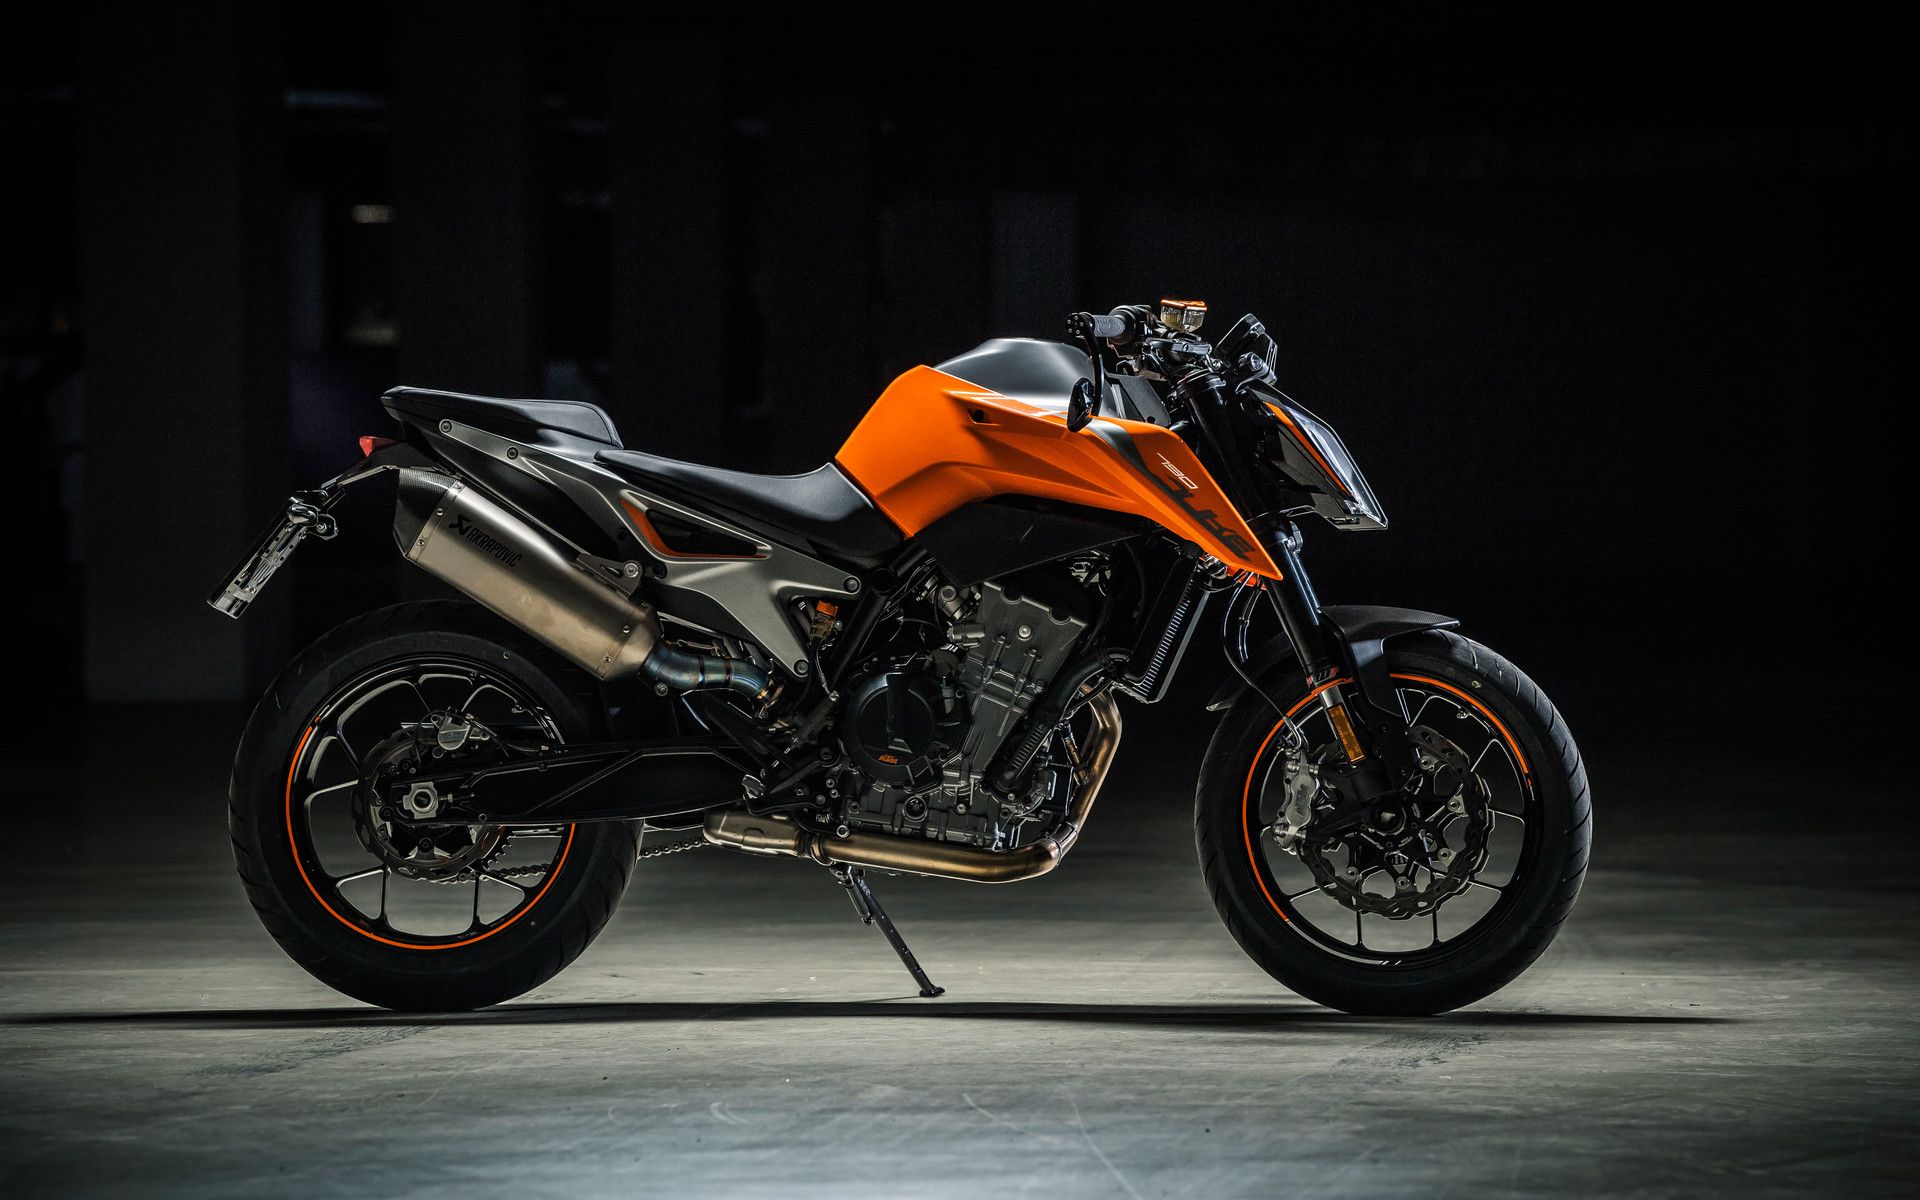  Bar-end mirrors and Akrapovic exhaust units with carbon-fiber ends are optional.